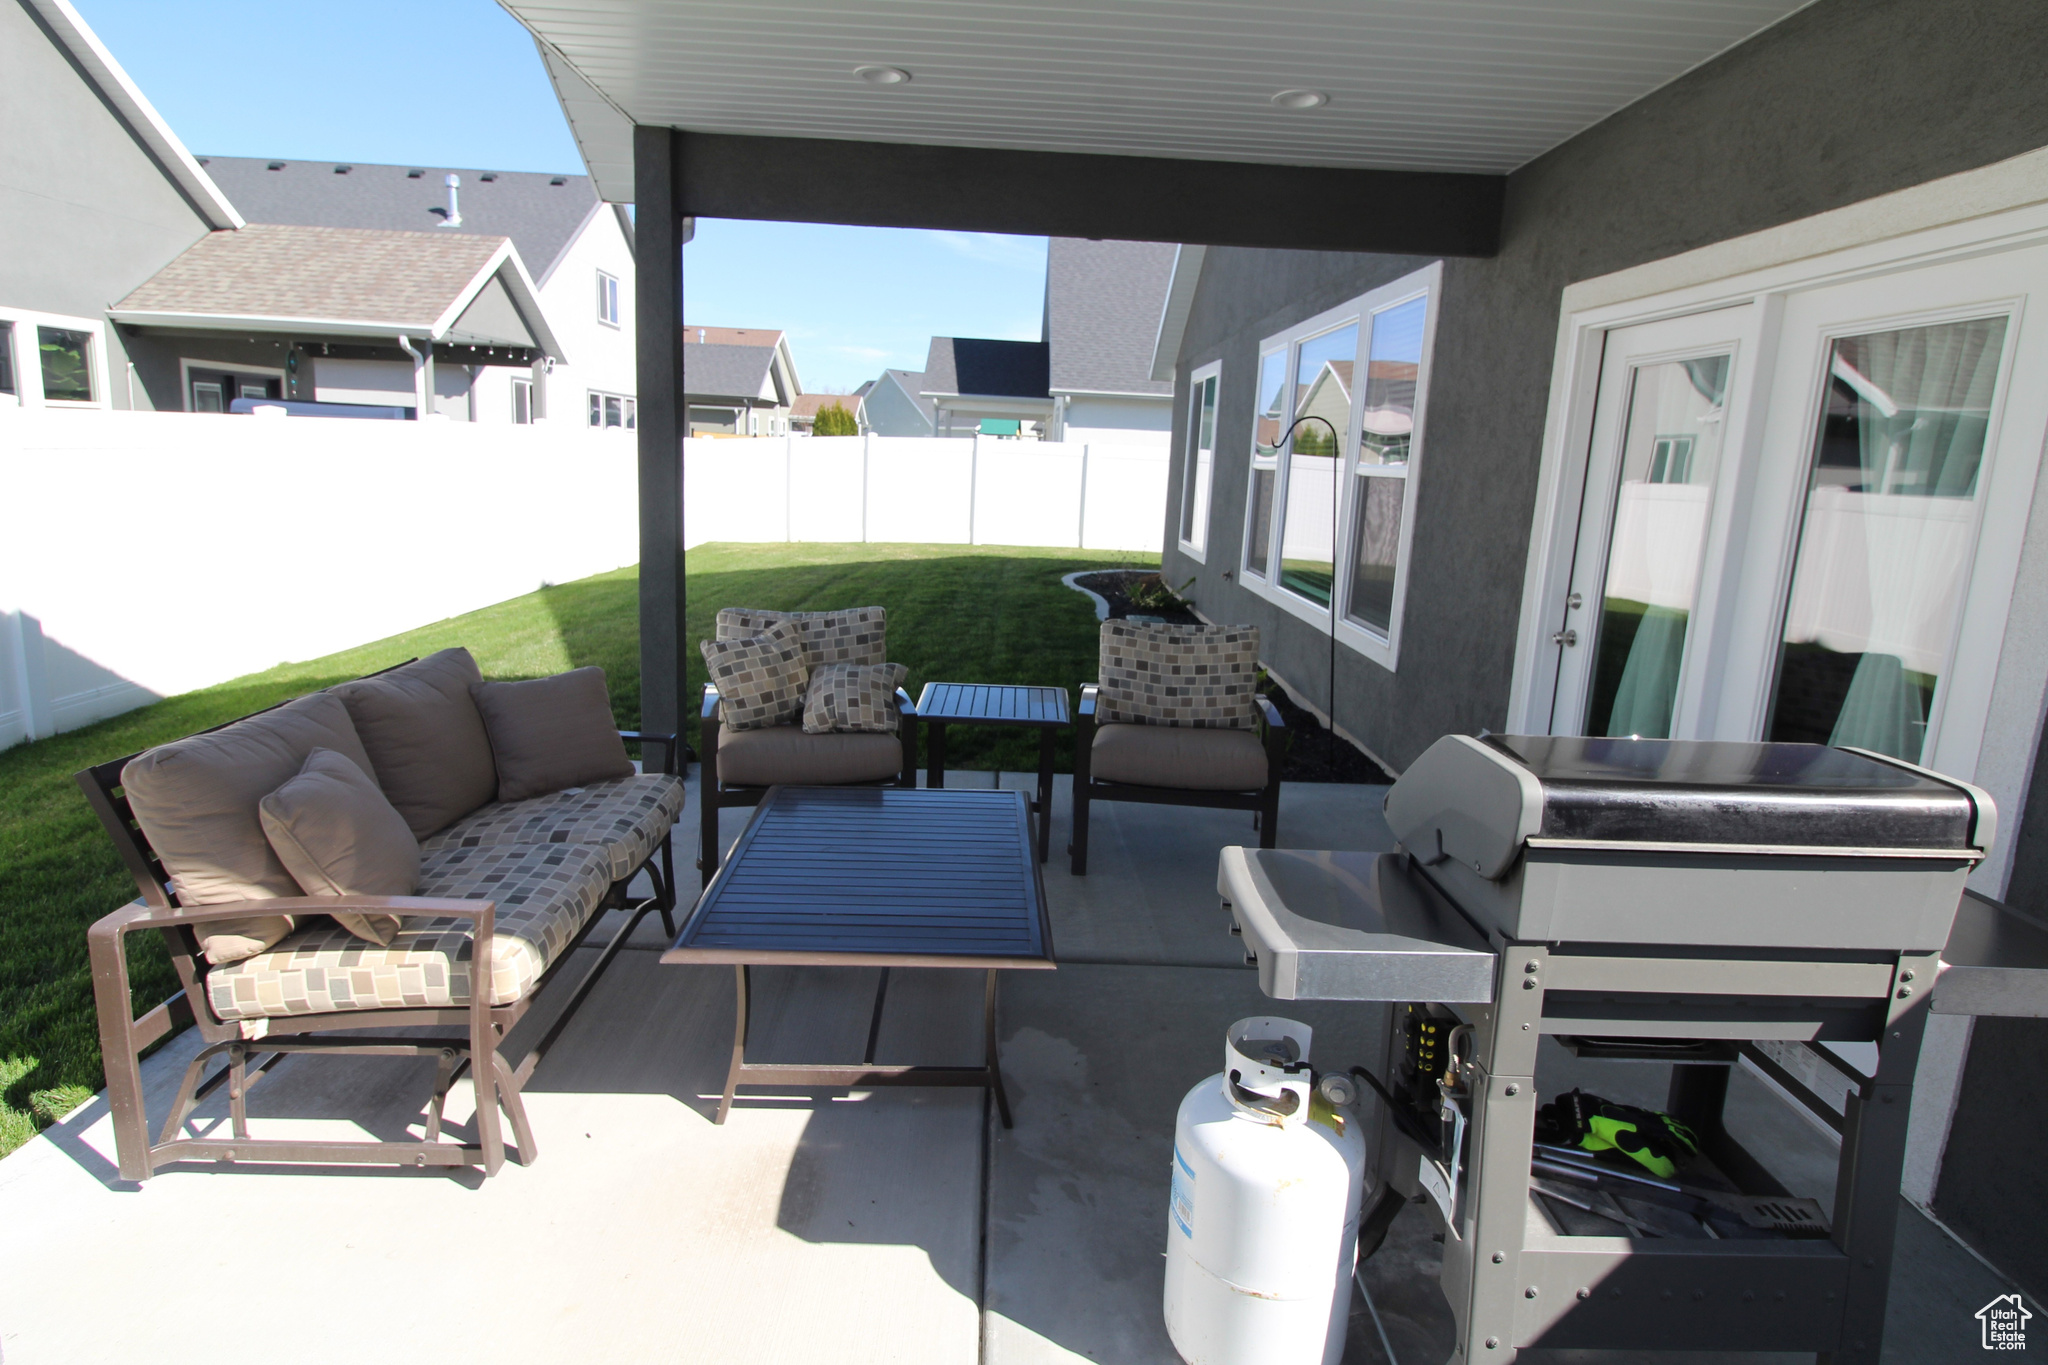 View of the covered patio with area for grilling and an outdoor hangout area